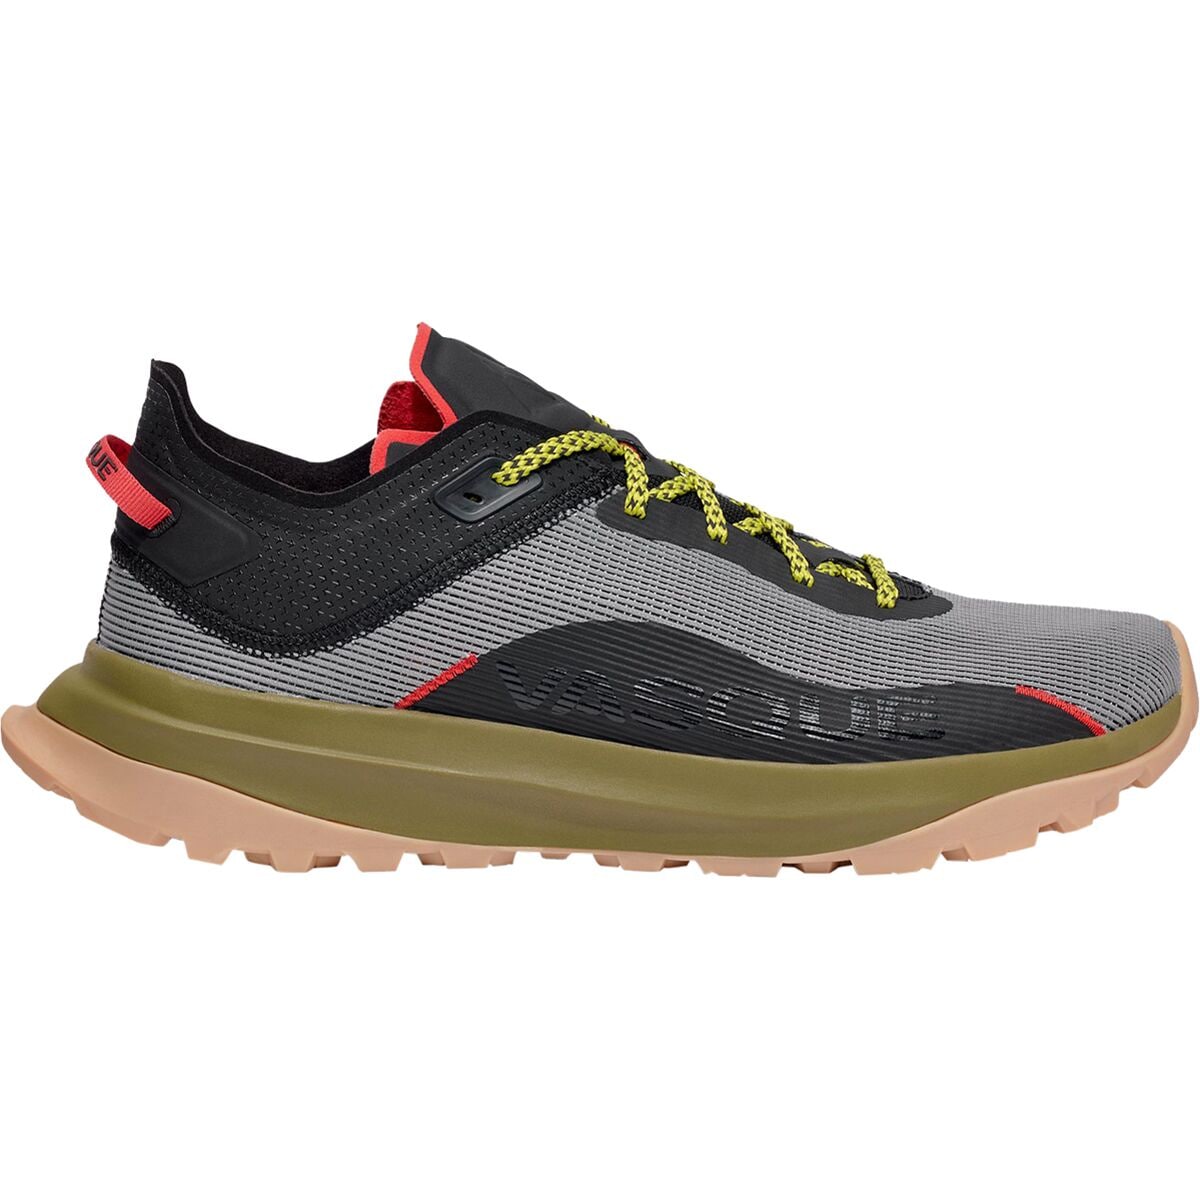 Re:Connect Here Low Hiking Shoe - Men